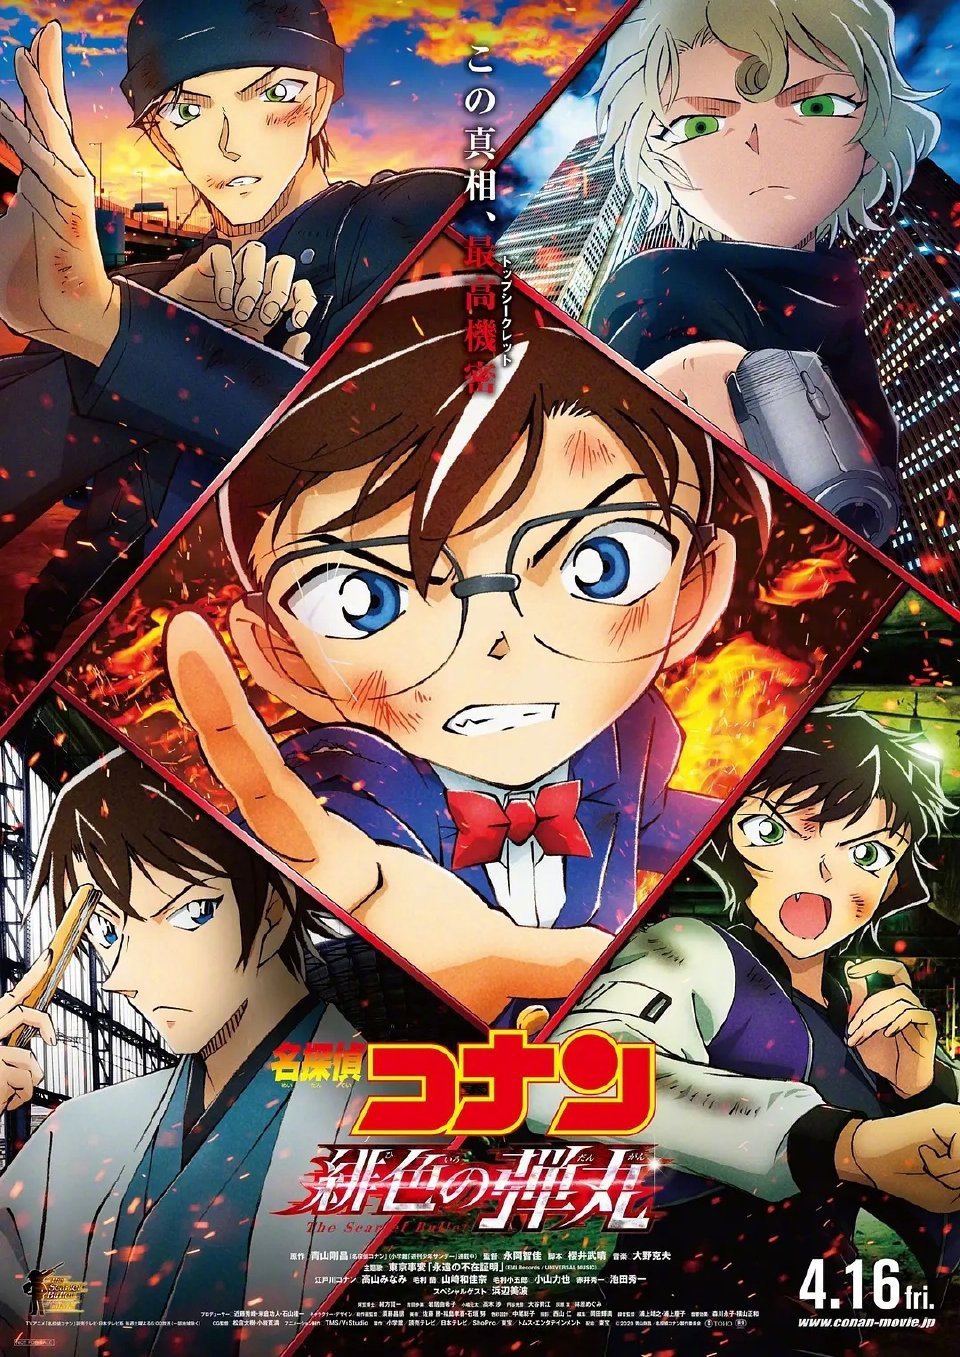 Latest film in the Detective Conan franchise may take a hit at Chinese